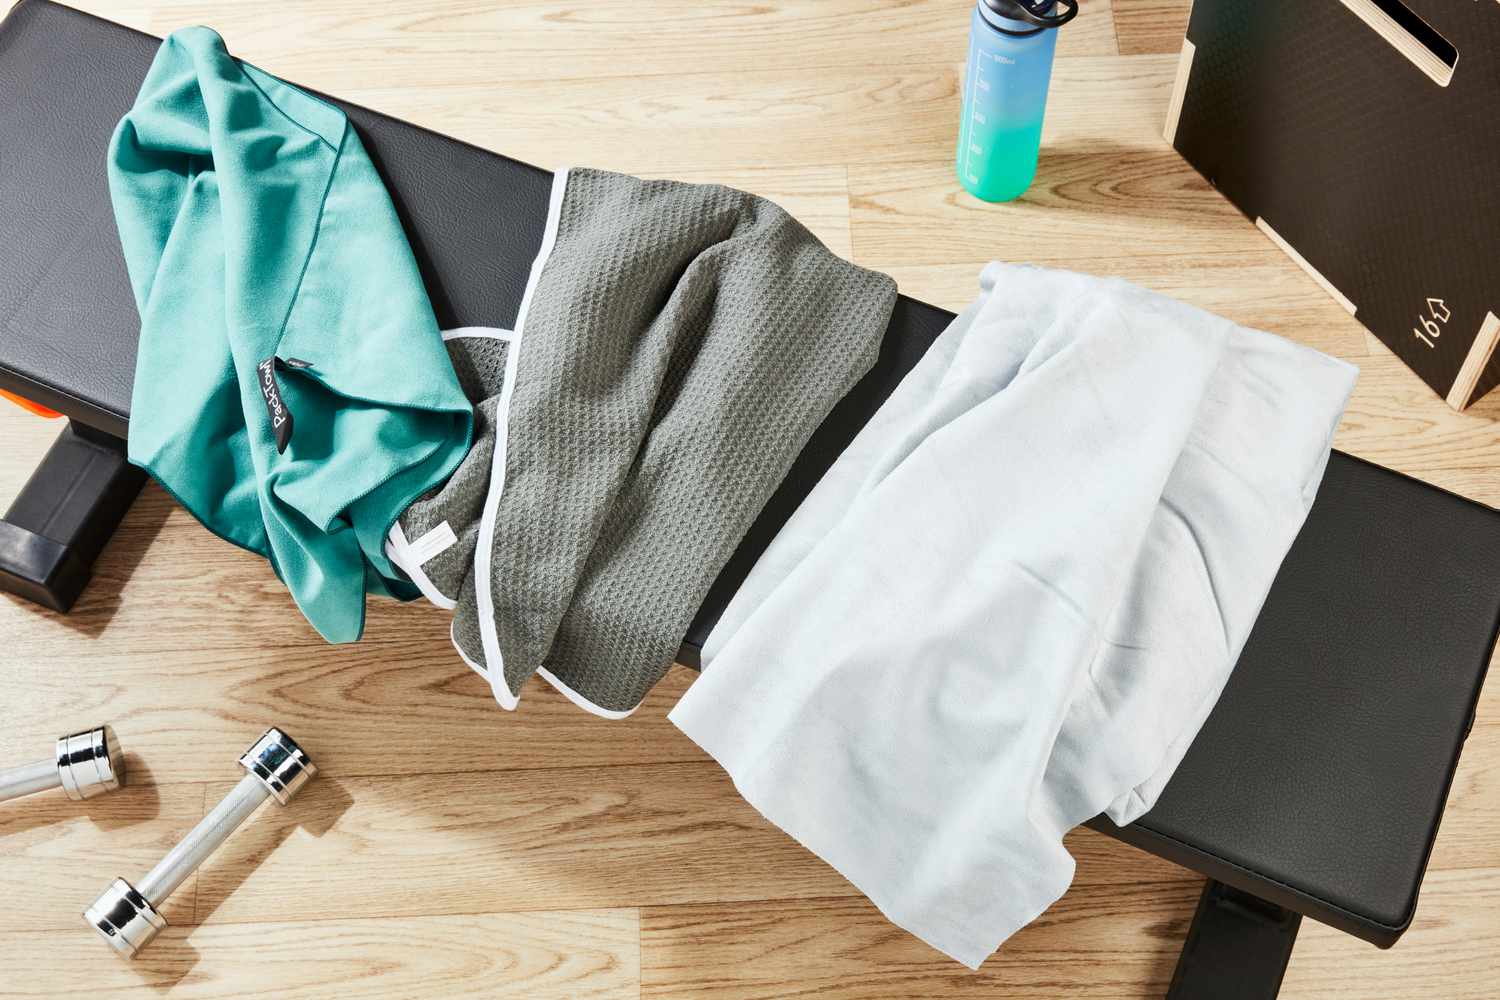 Three gym towels we recommended hanging on workout bench